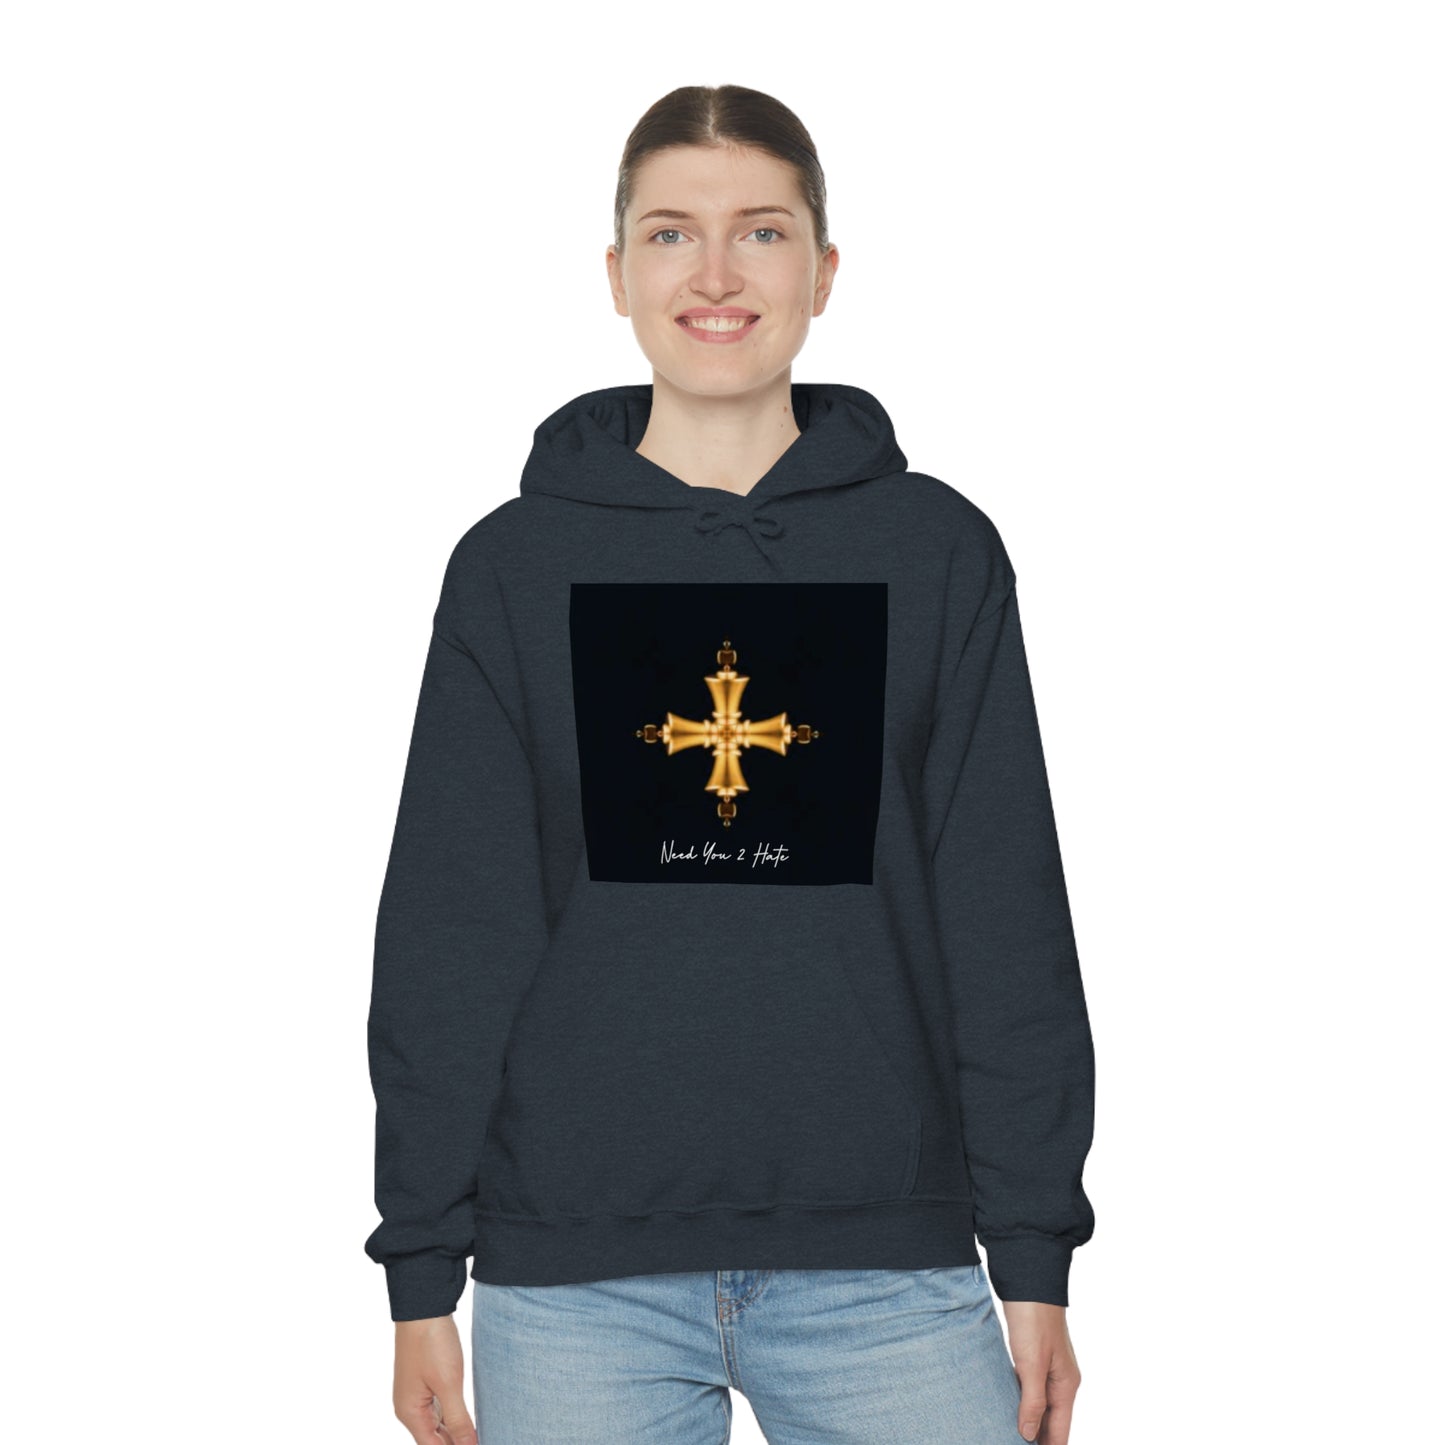 Need You 2 Hate Chess Not Checkers! Blend™ Hooded Sweatshirt